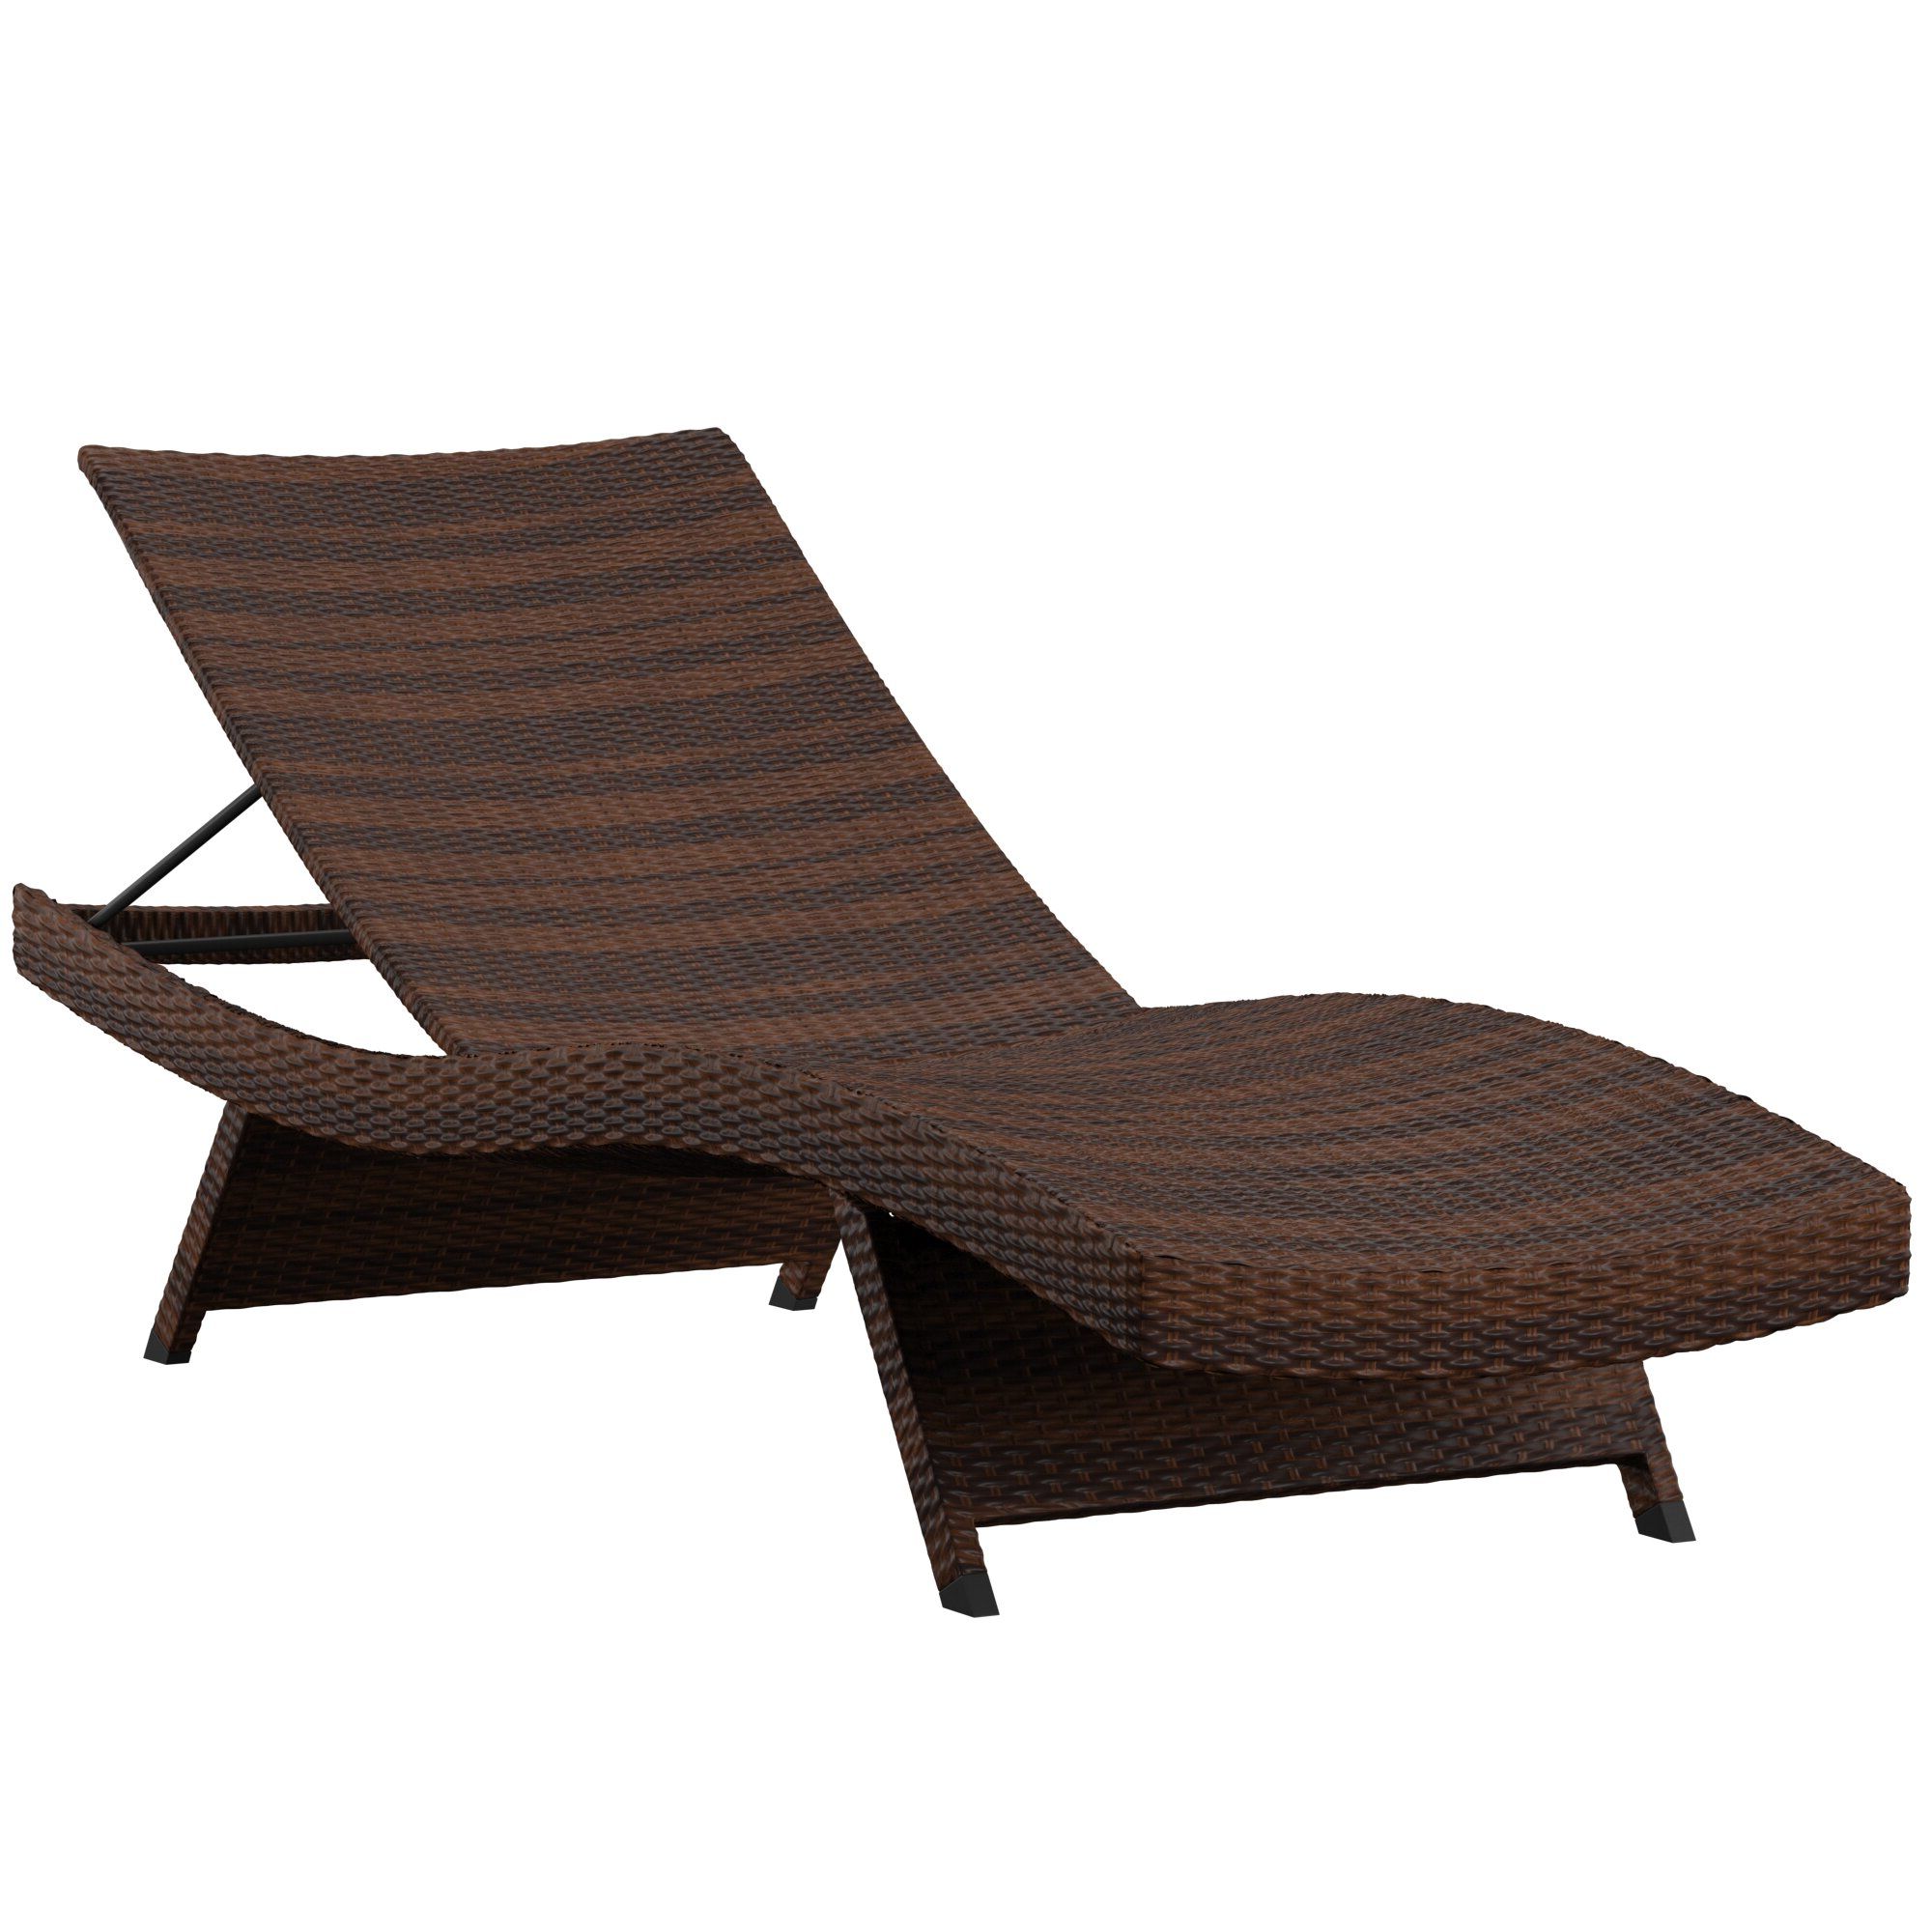 Current Rebello Reclining Chaise Lounge Within Reclining Sling Chaise Lounges (View 17 of 25)